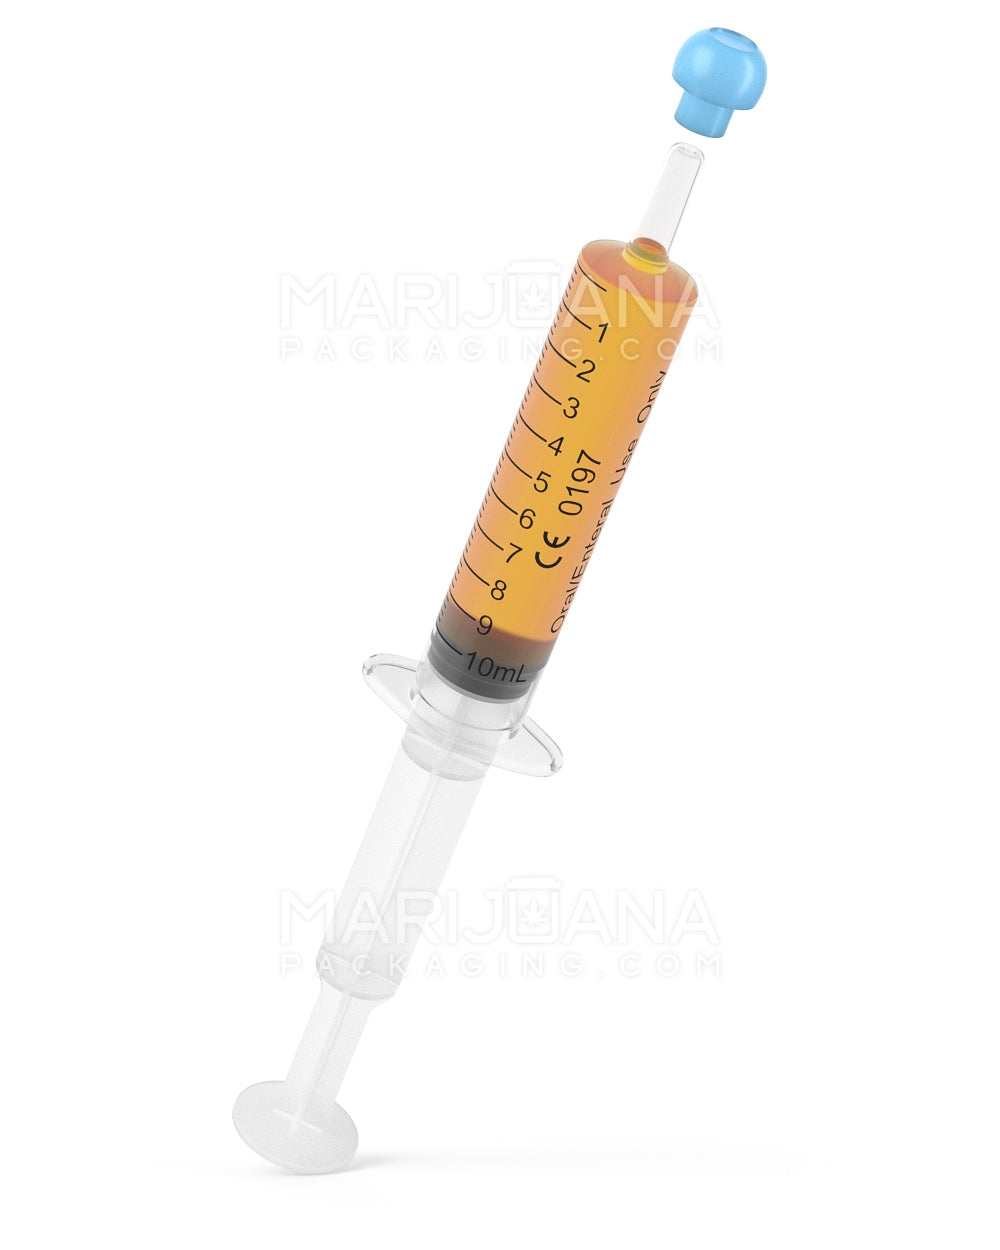 Plastic Oral Concentrate Syringes | 10mL - 1mL Increments | Sample - 6